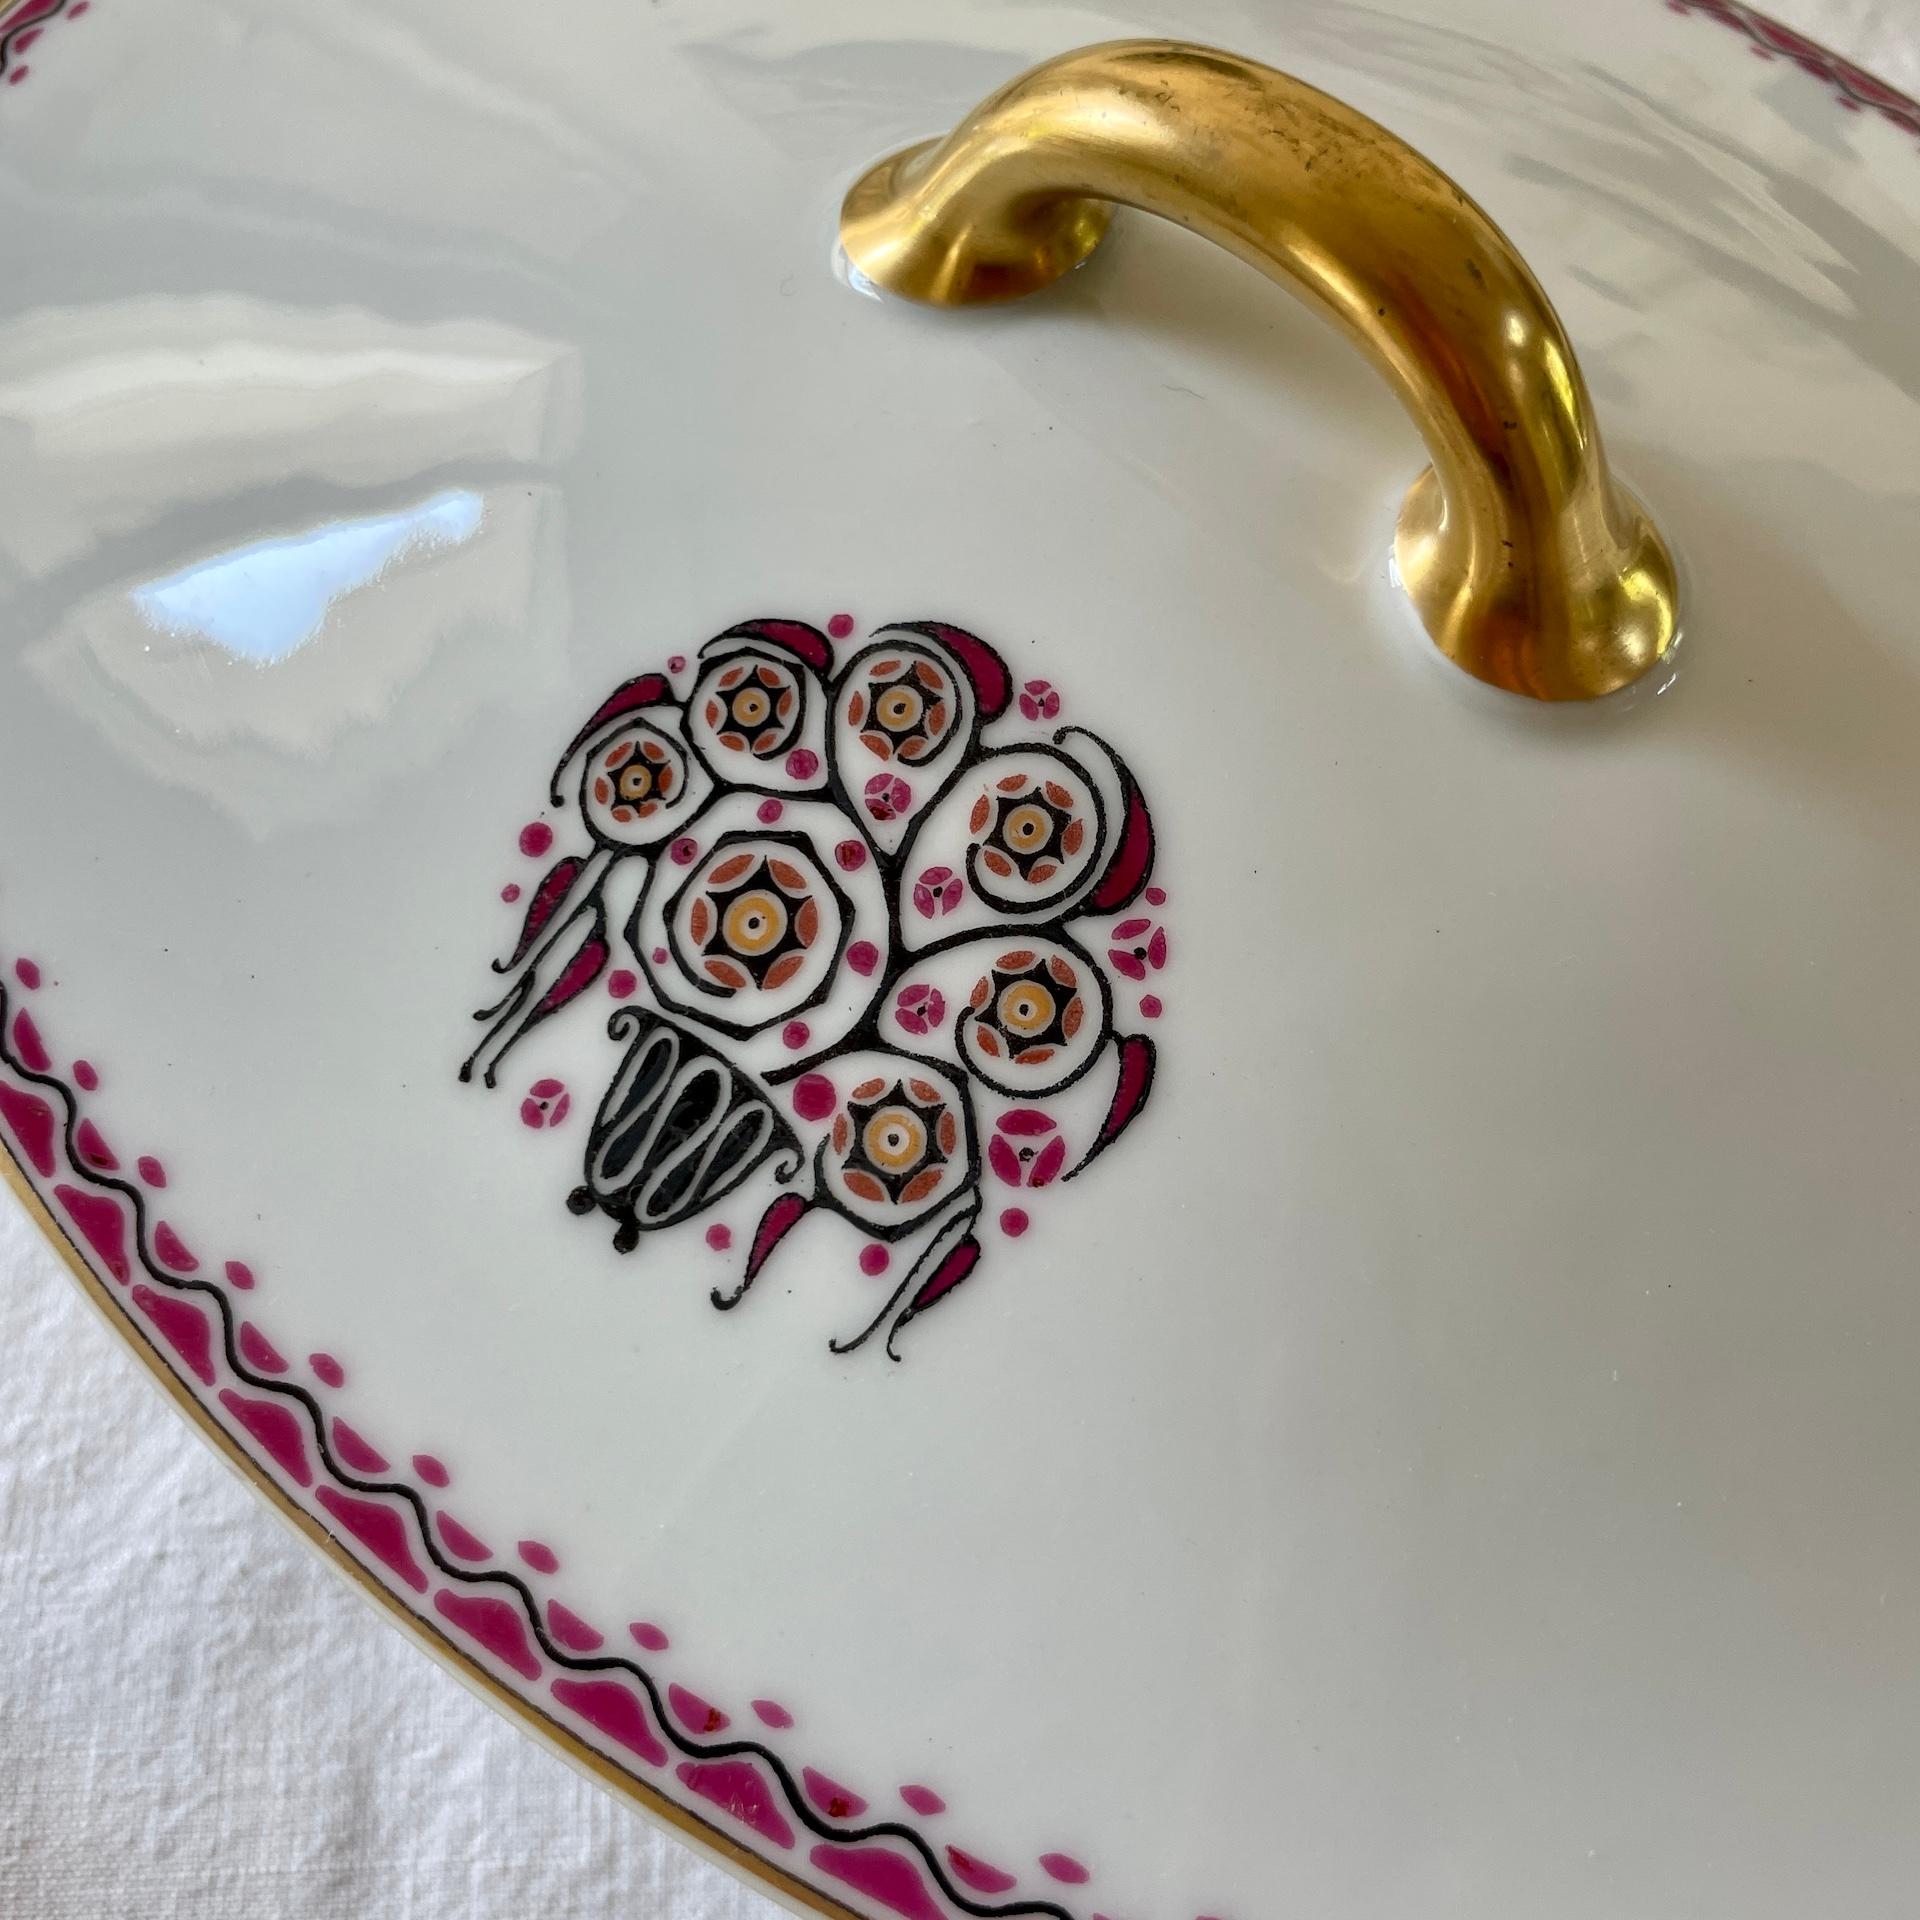 This table service is typically Art Deco.
Signed by a famous porcelain manufacture in Limoges, the Haviland factory, signed Haviland and Decorated by Haviland & Co for the Palais de Cristal in Toulon.
The stylized floral decoration is remarkable for